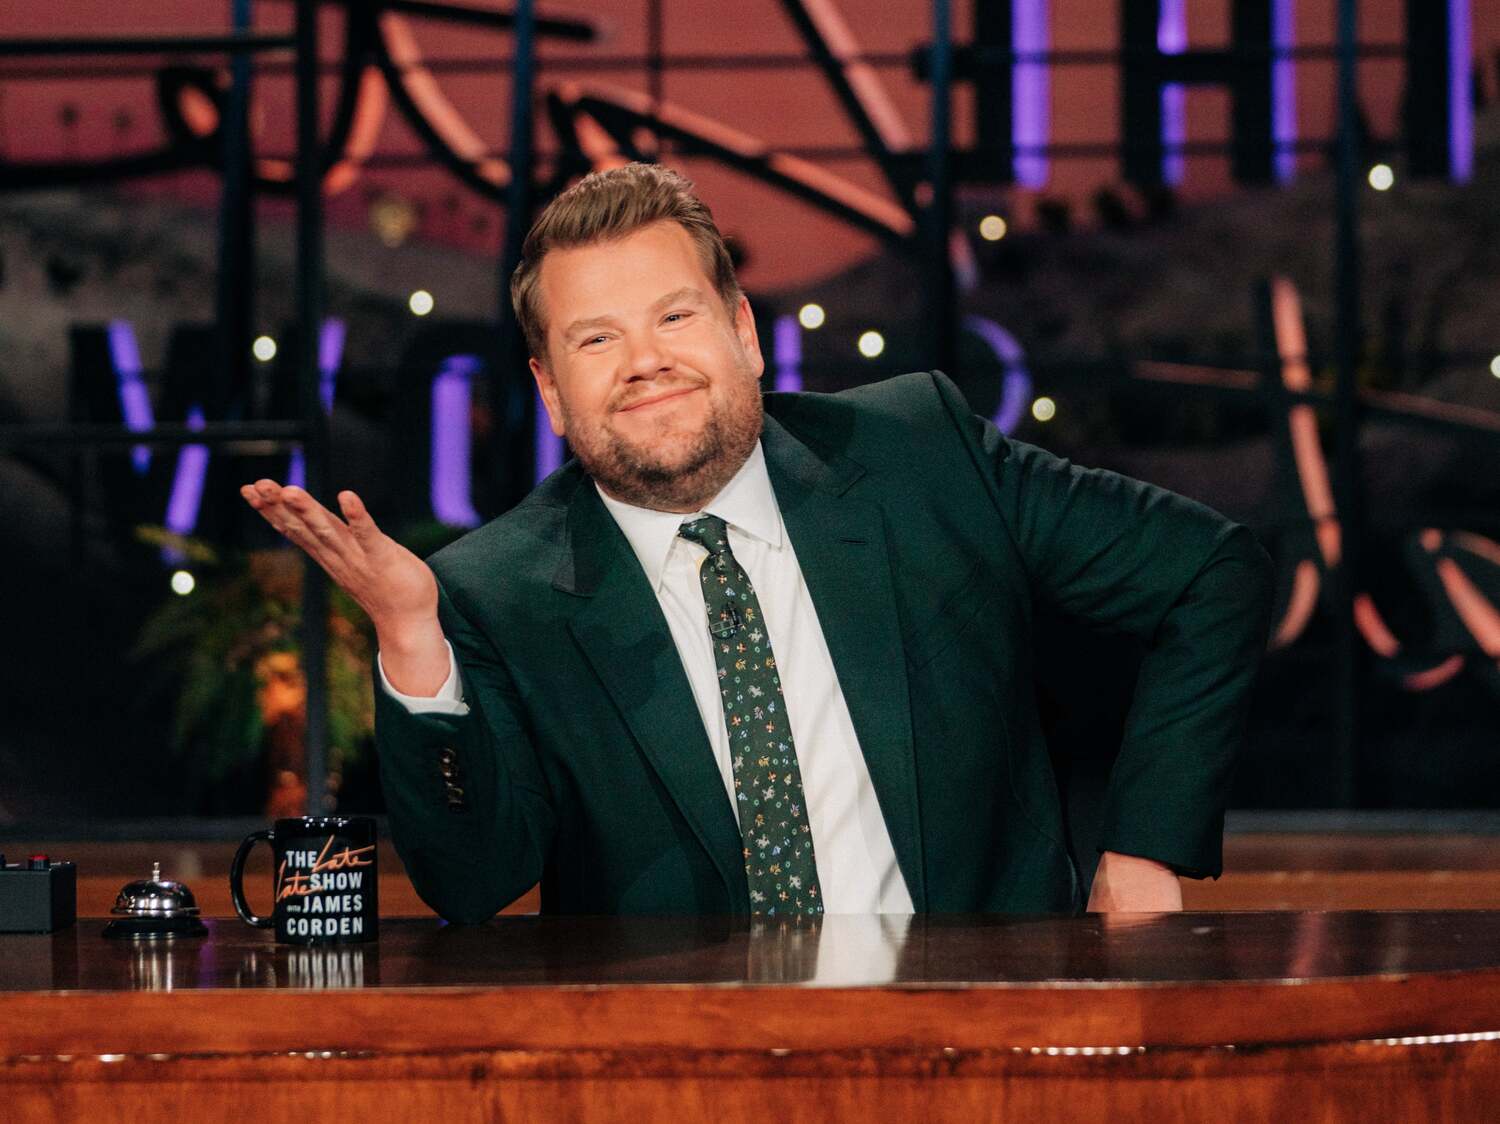 James Corden bids farewell to US late-night show with star-studded episode and heartfelt message